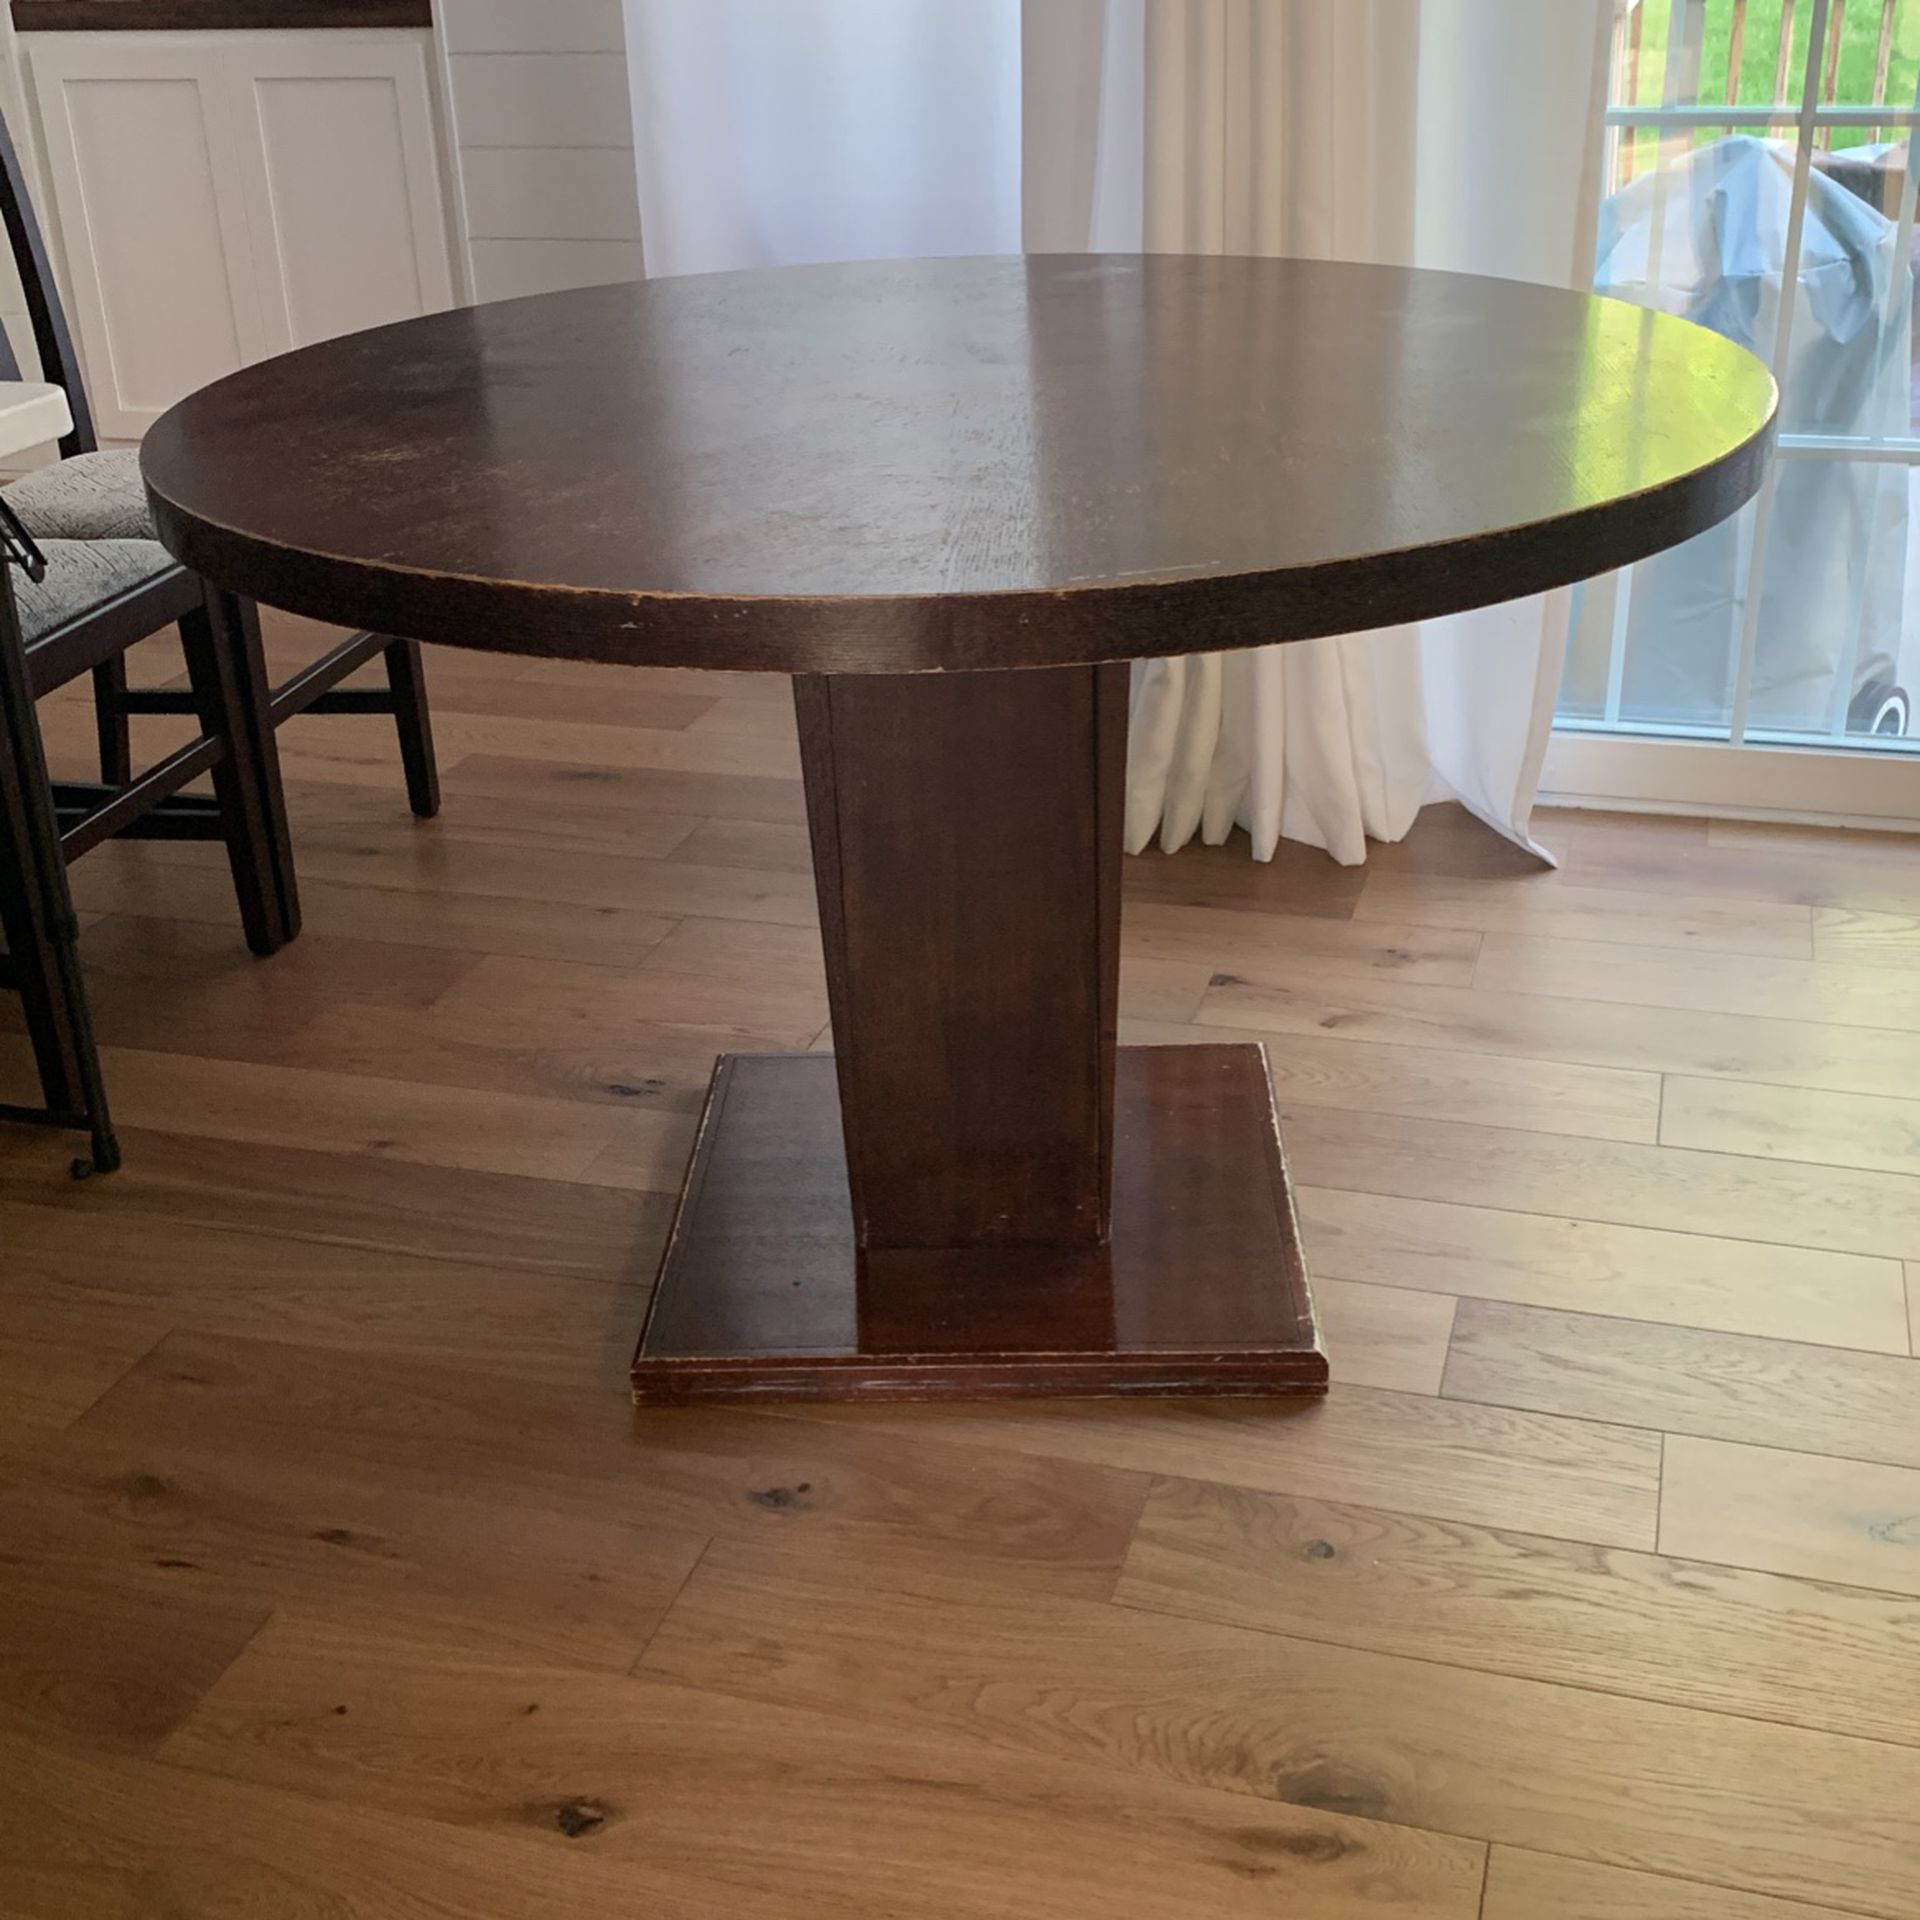 Breakfast Round Wood Table 47.5 Inches